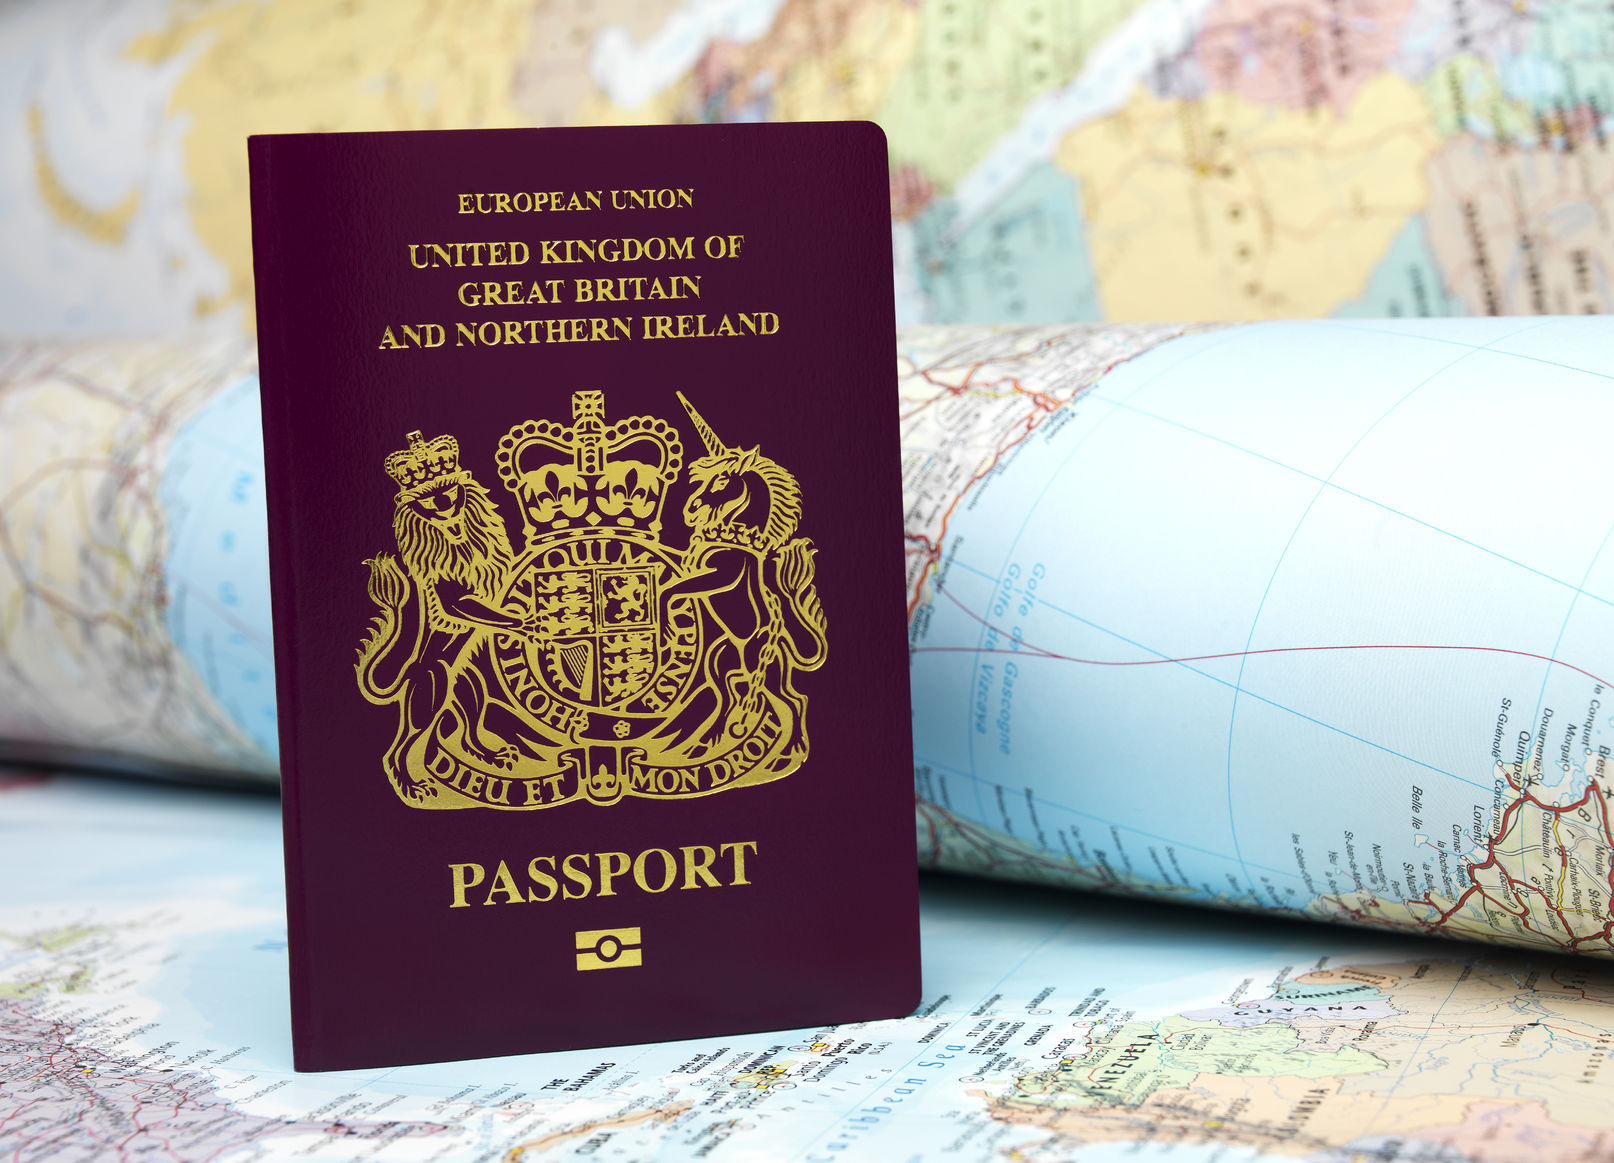 Business immigration help and assistance in London